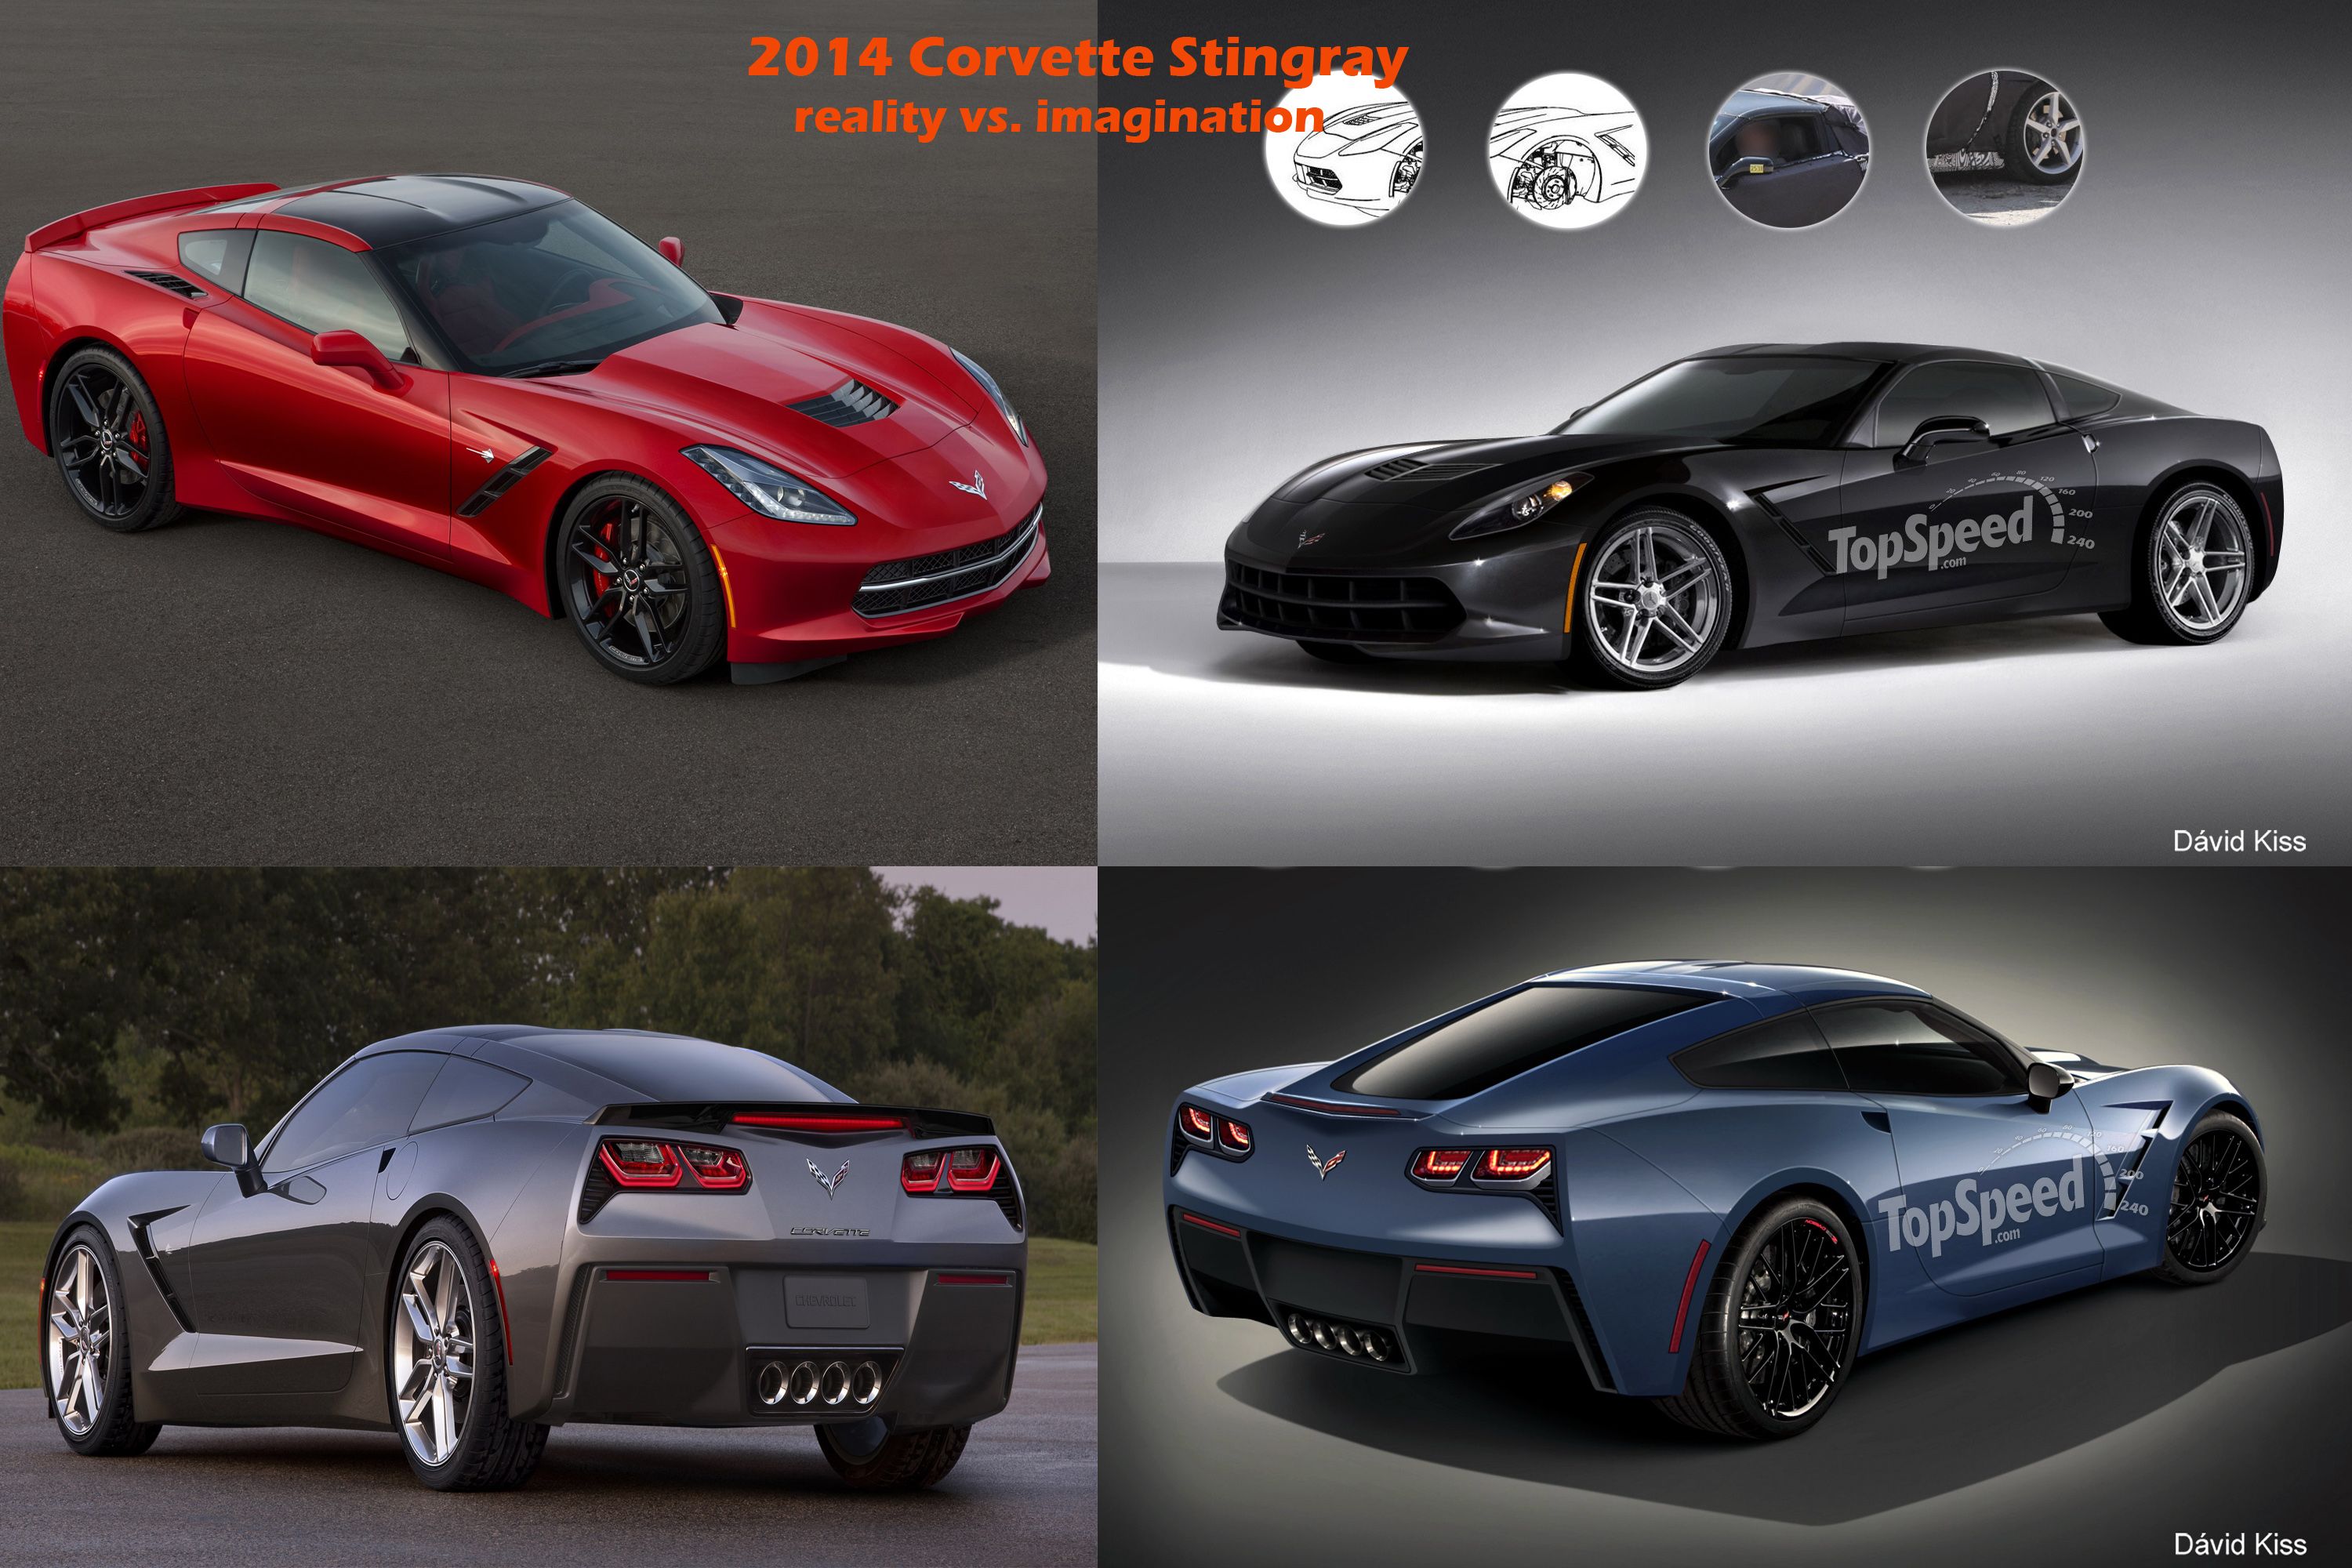 The C7 Corvette is Out - Renderings vs Reality